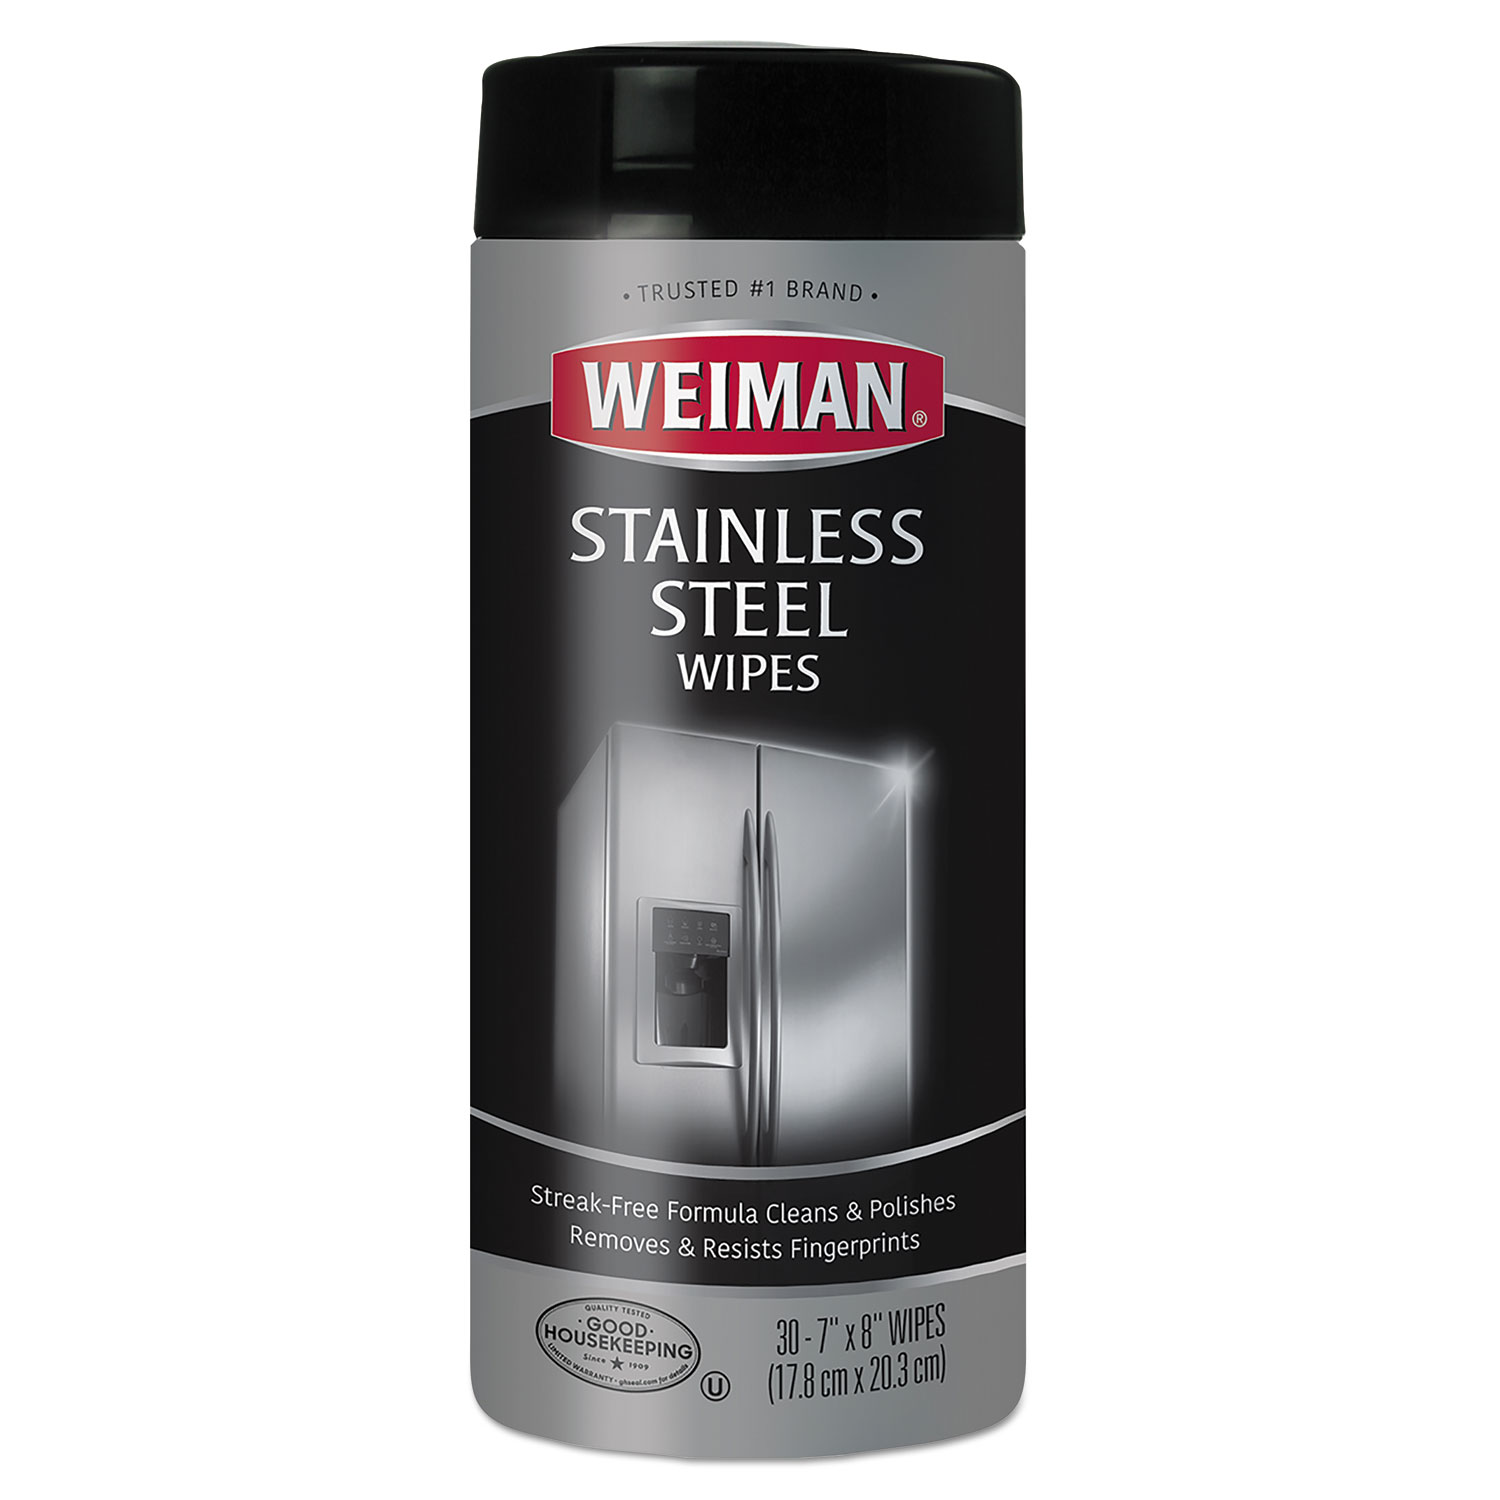  WEIMAN 92 Stainless Steel Wipes, 7 x 8, 30/Canister (WMN92) 